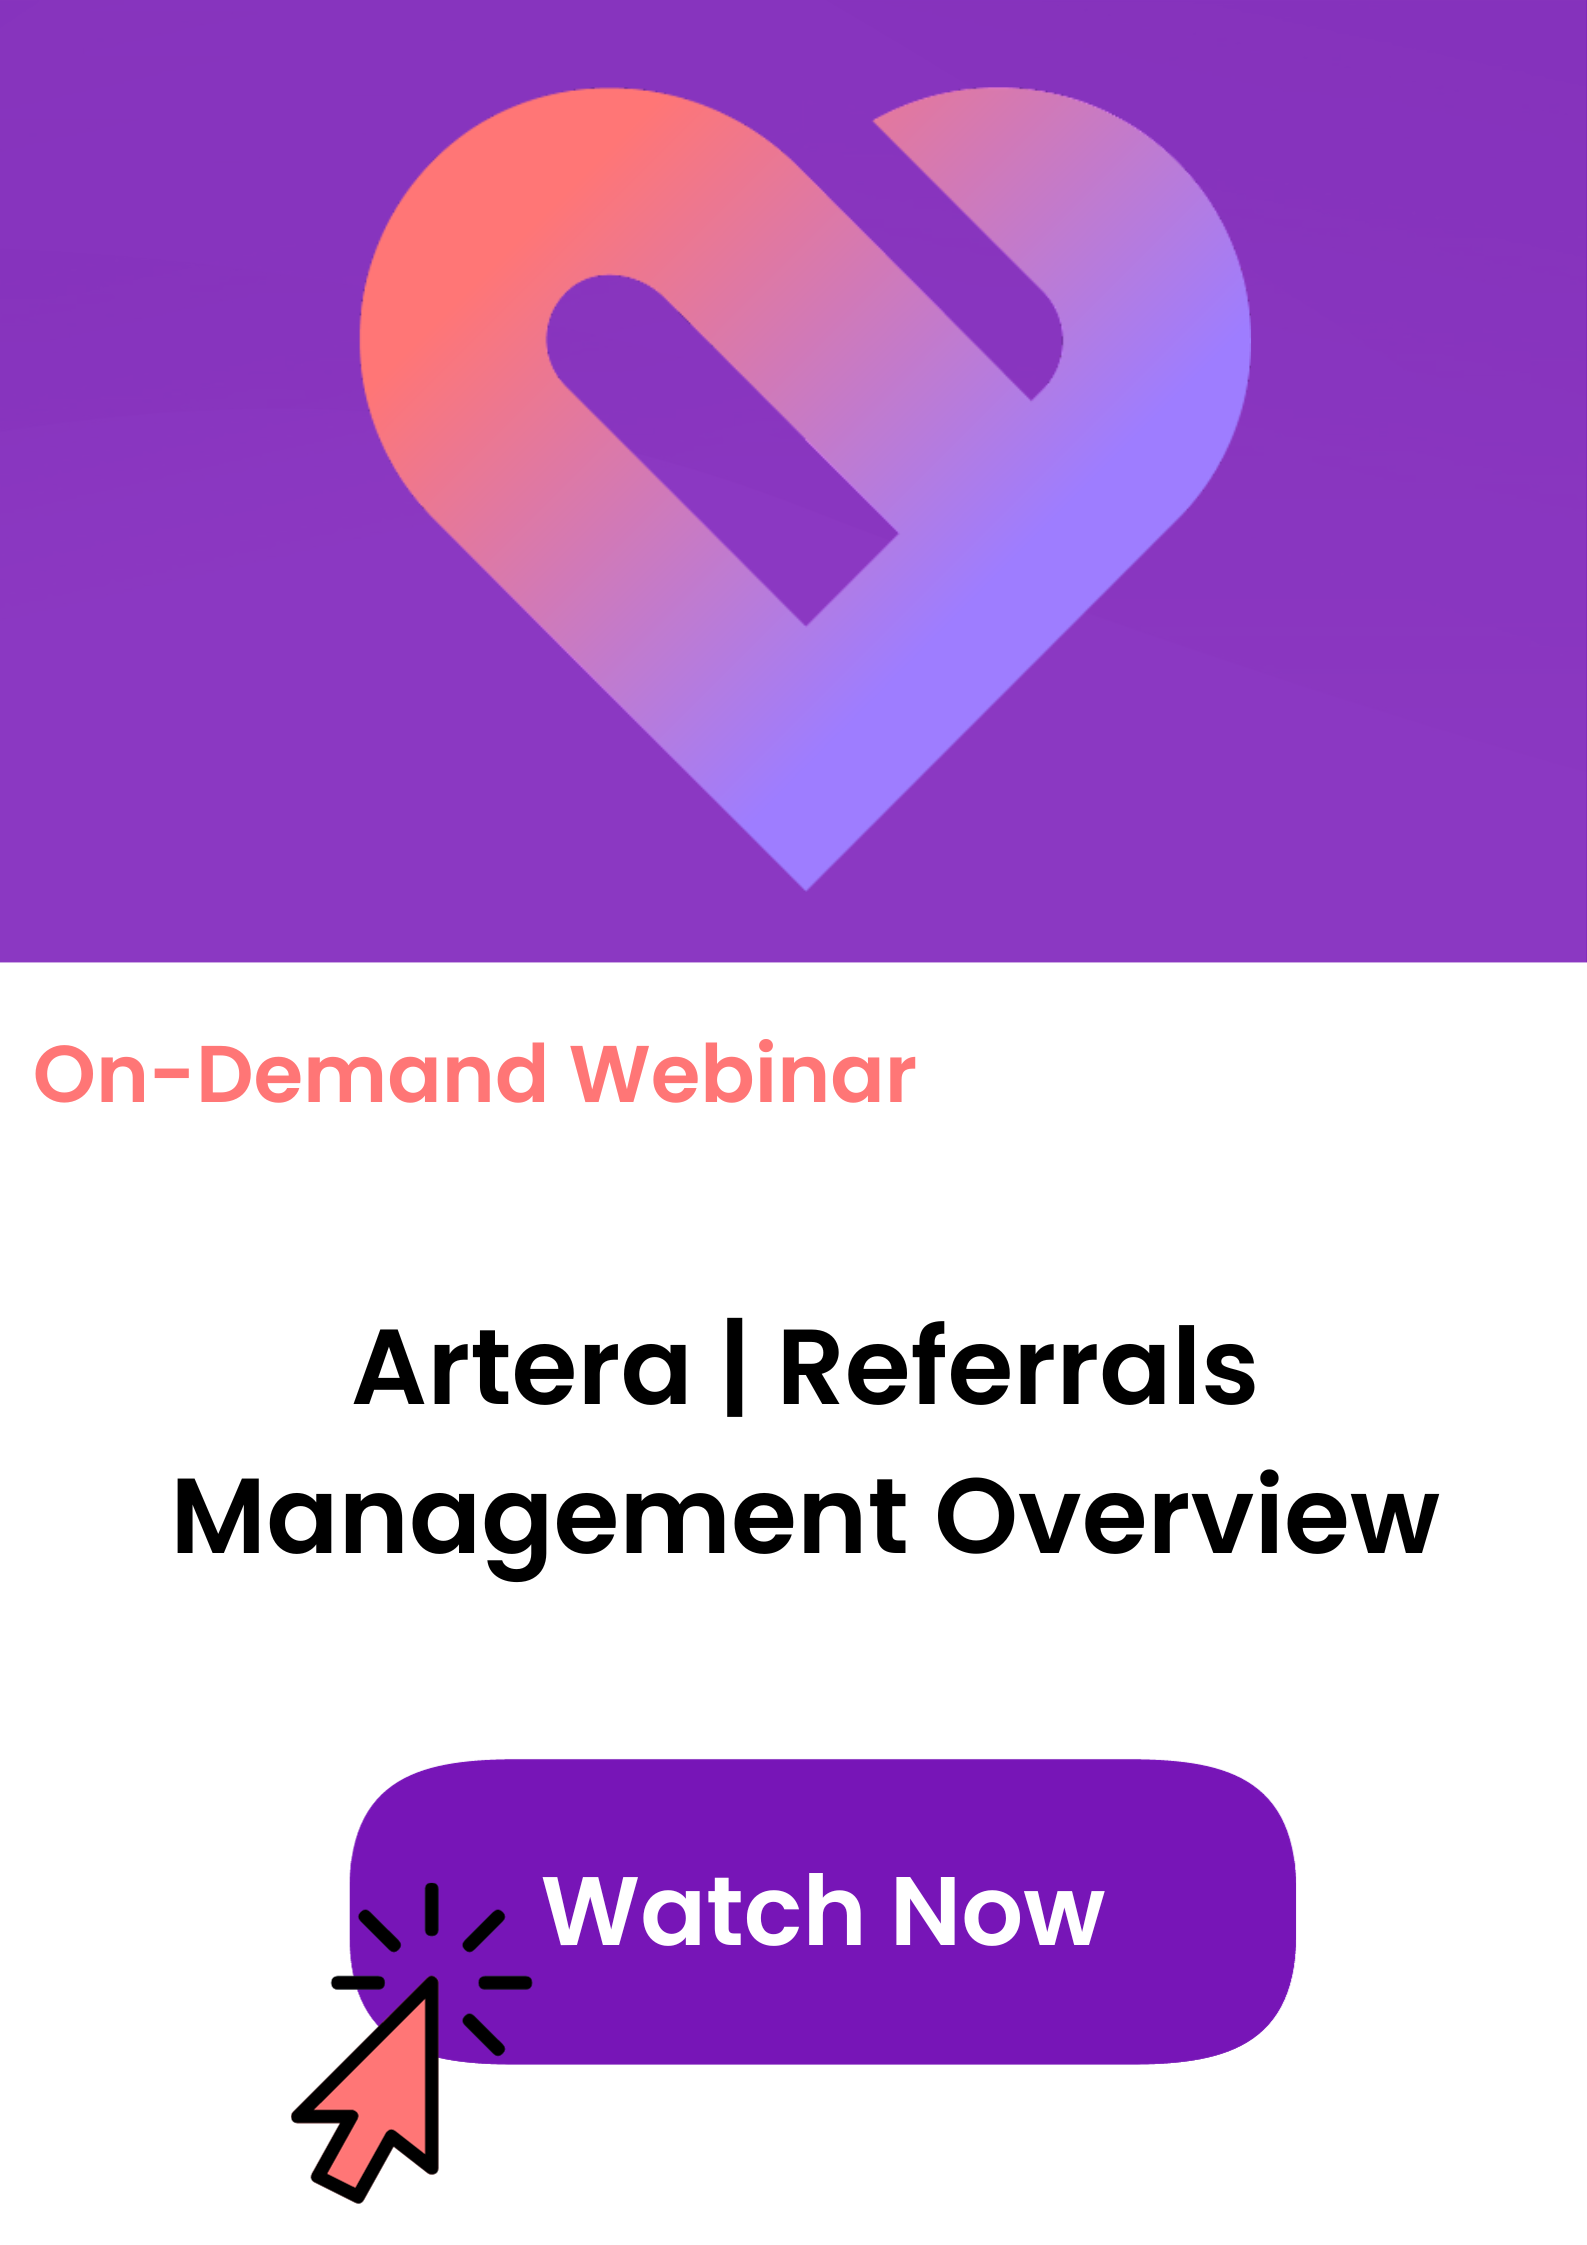 On-demand webinar tile for Referrals Management Overview, click to watch now